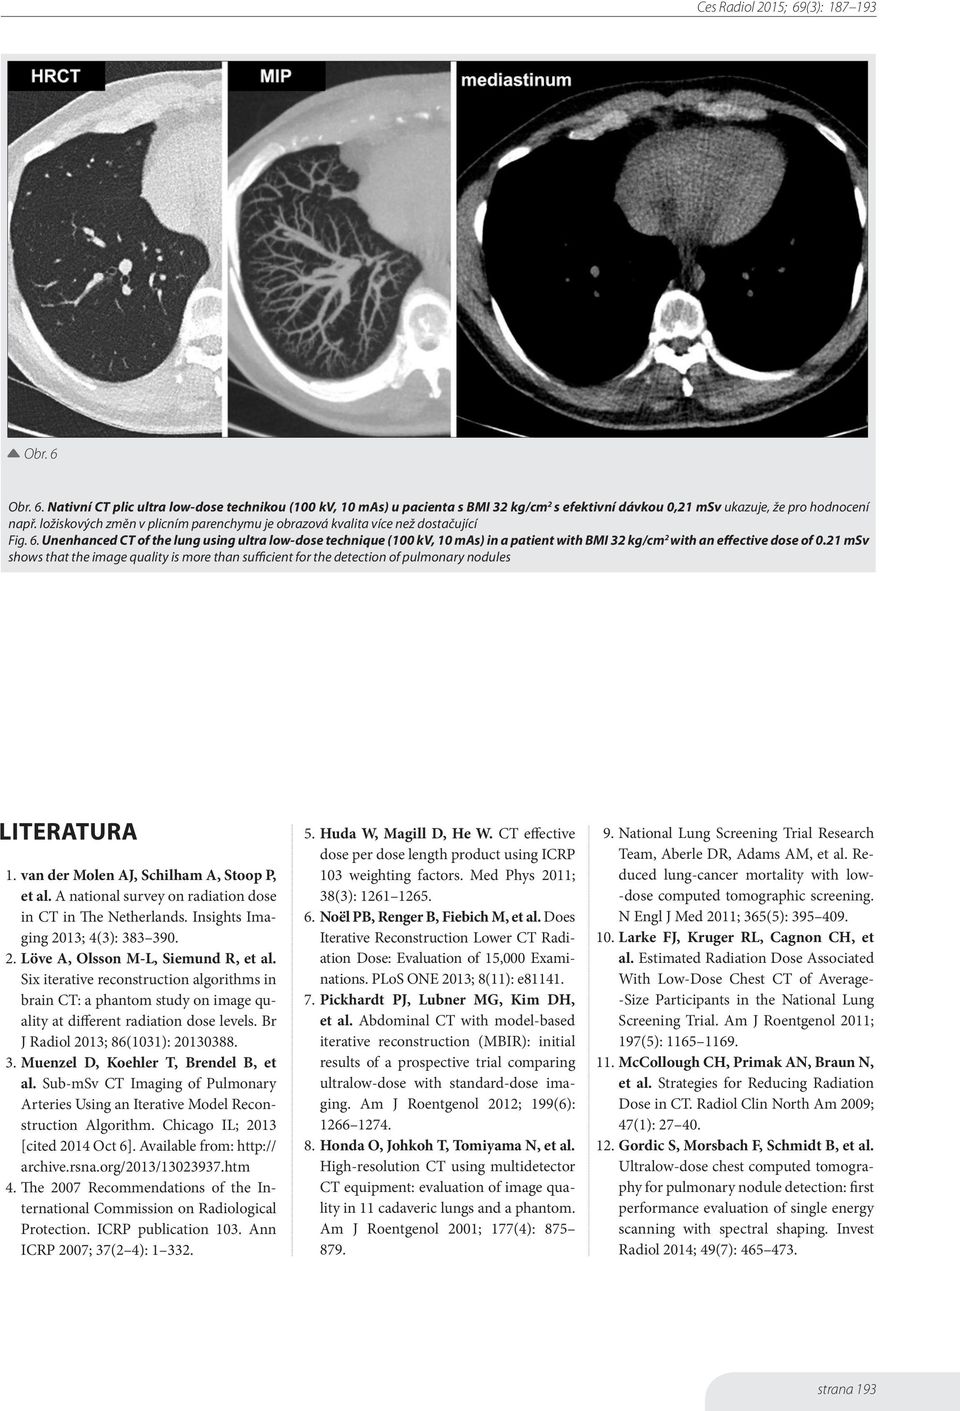 Unenhanced CT of the lung using ultra low-dose technique (100 kv, 10 mas) in a patient with BMI 32 kg/cm 2 with an effective dose of 0.